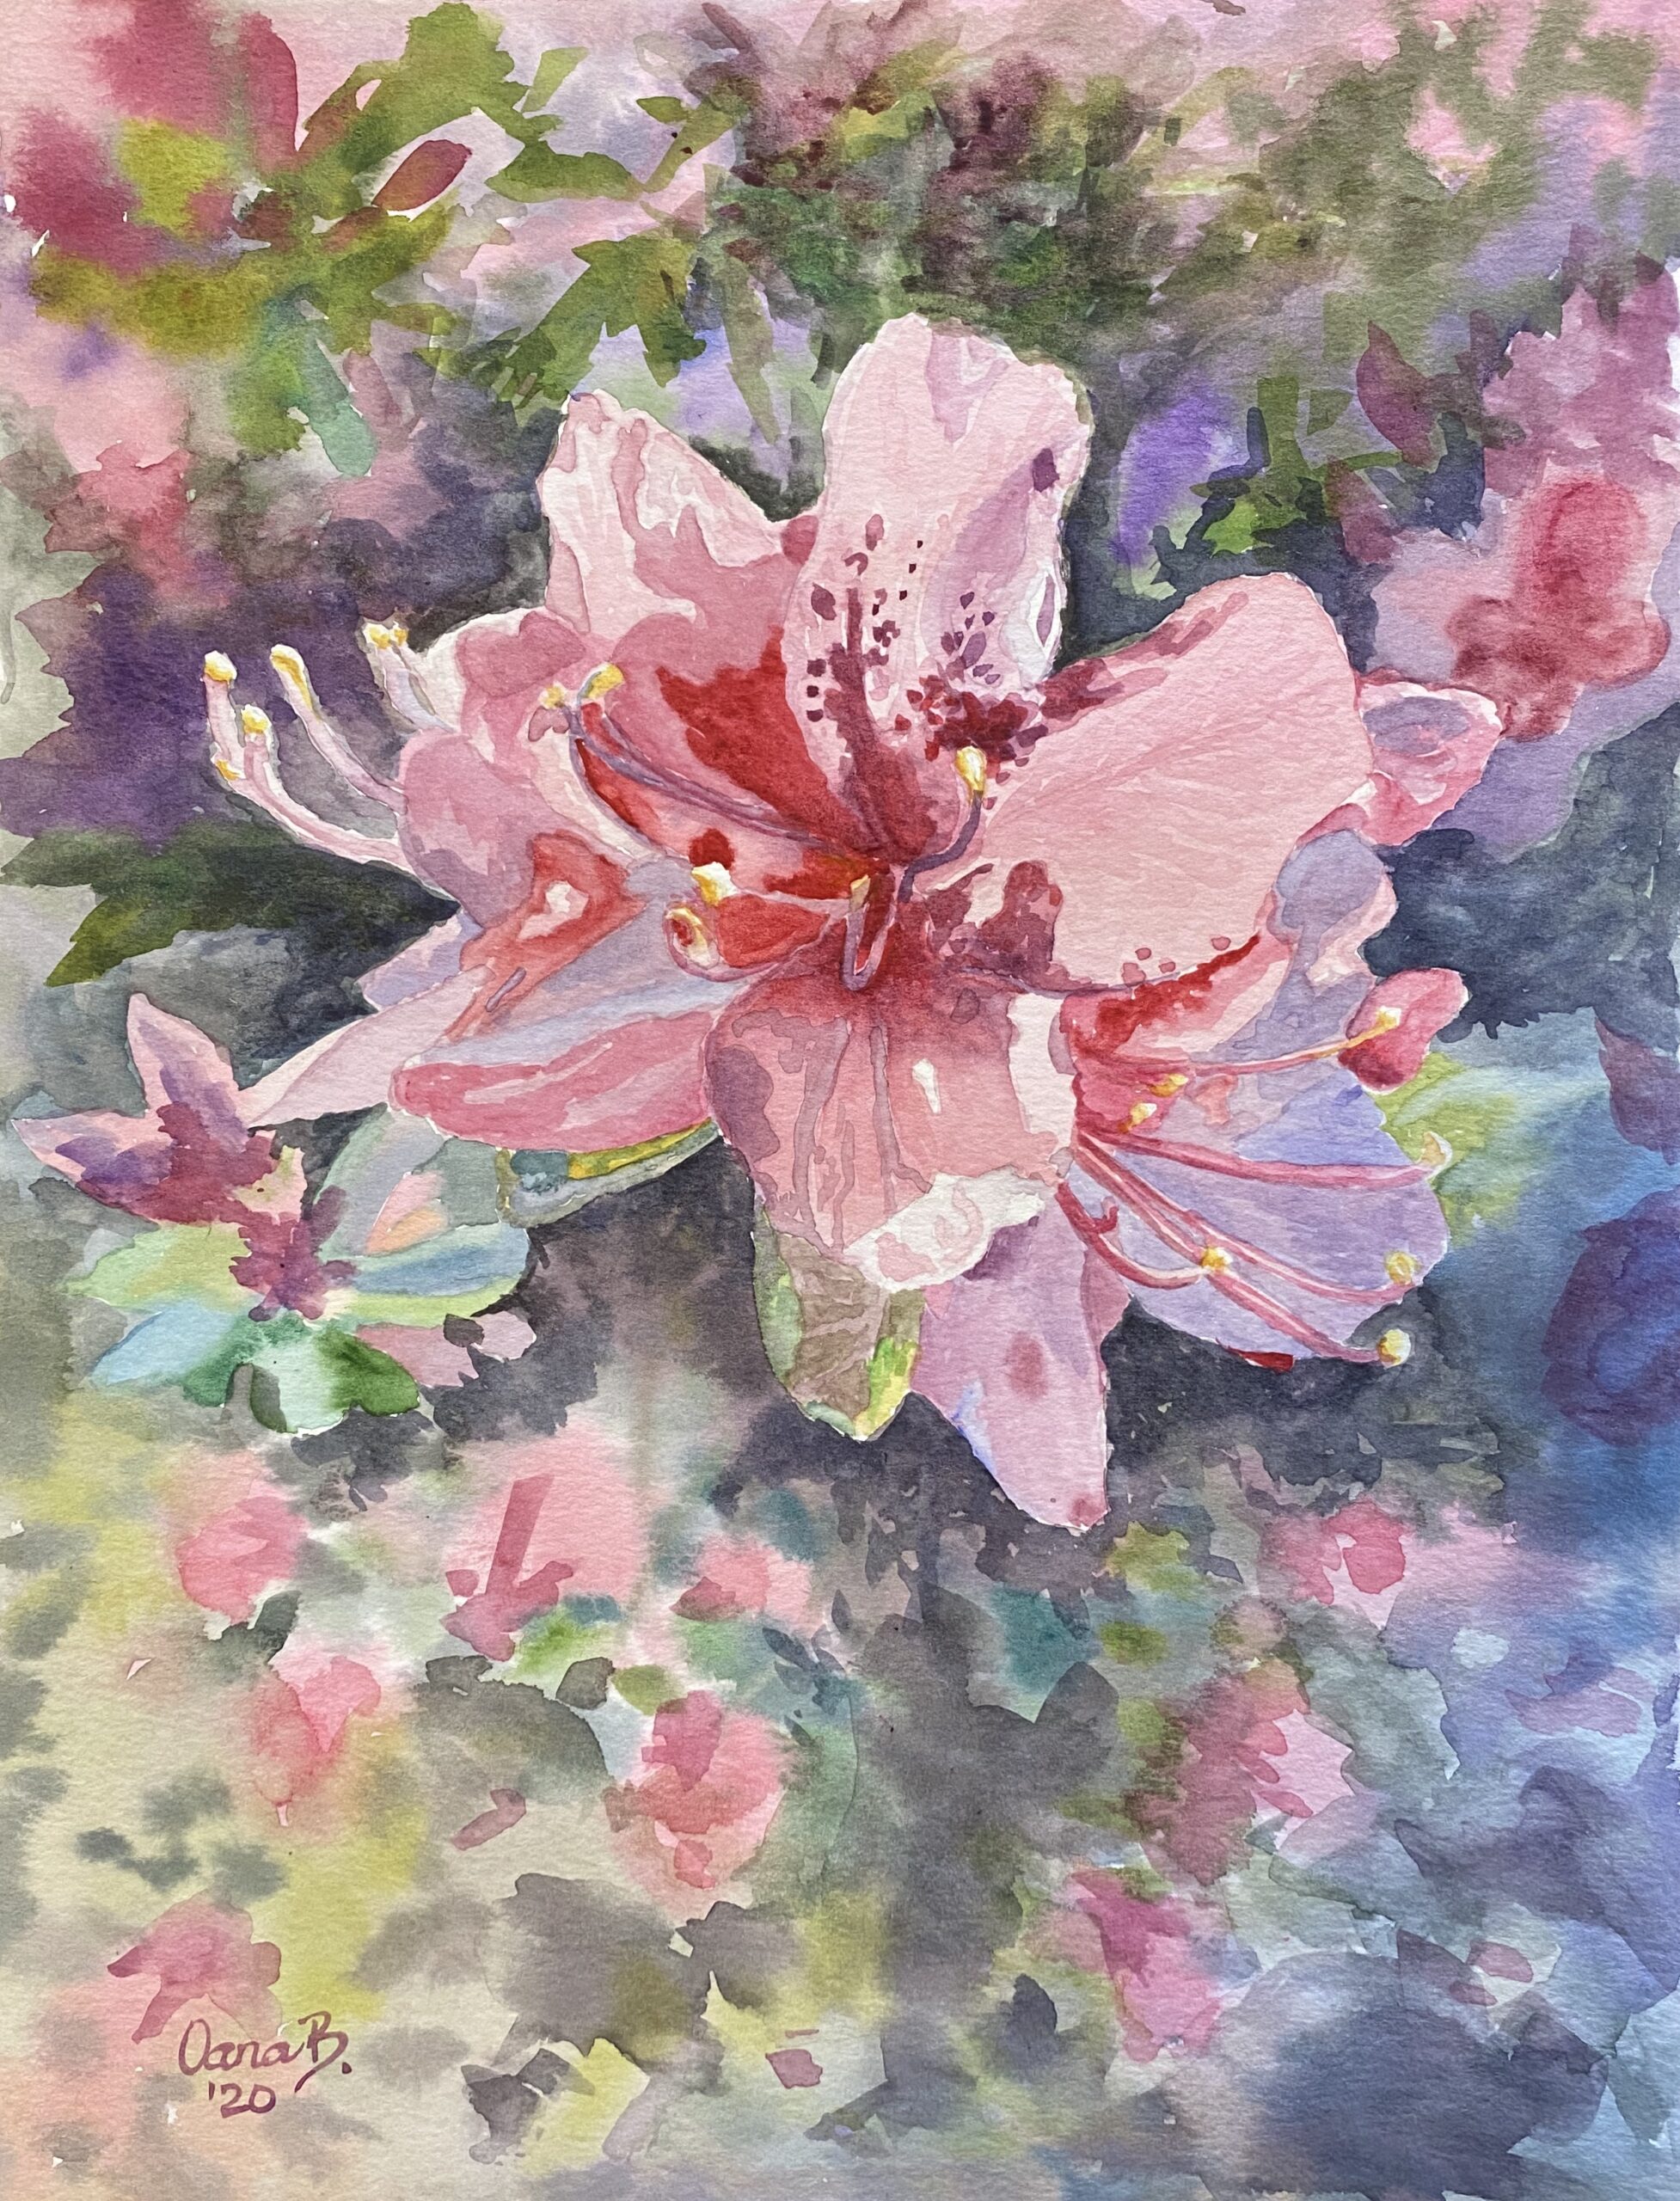 A watercolor painting a pink blossom flower in spring time with other flowers visible in the background.